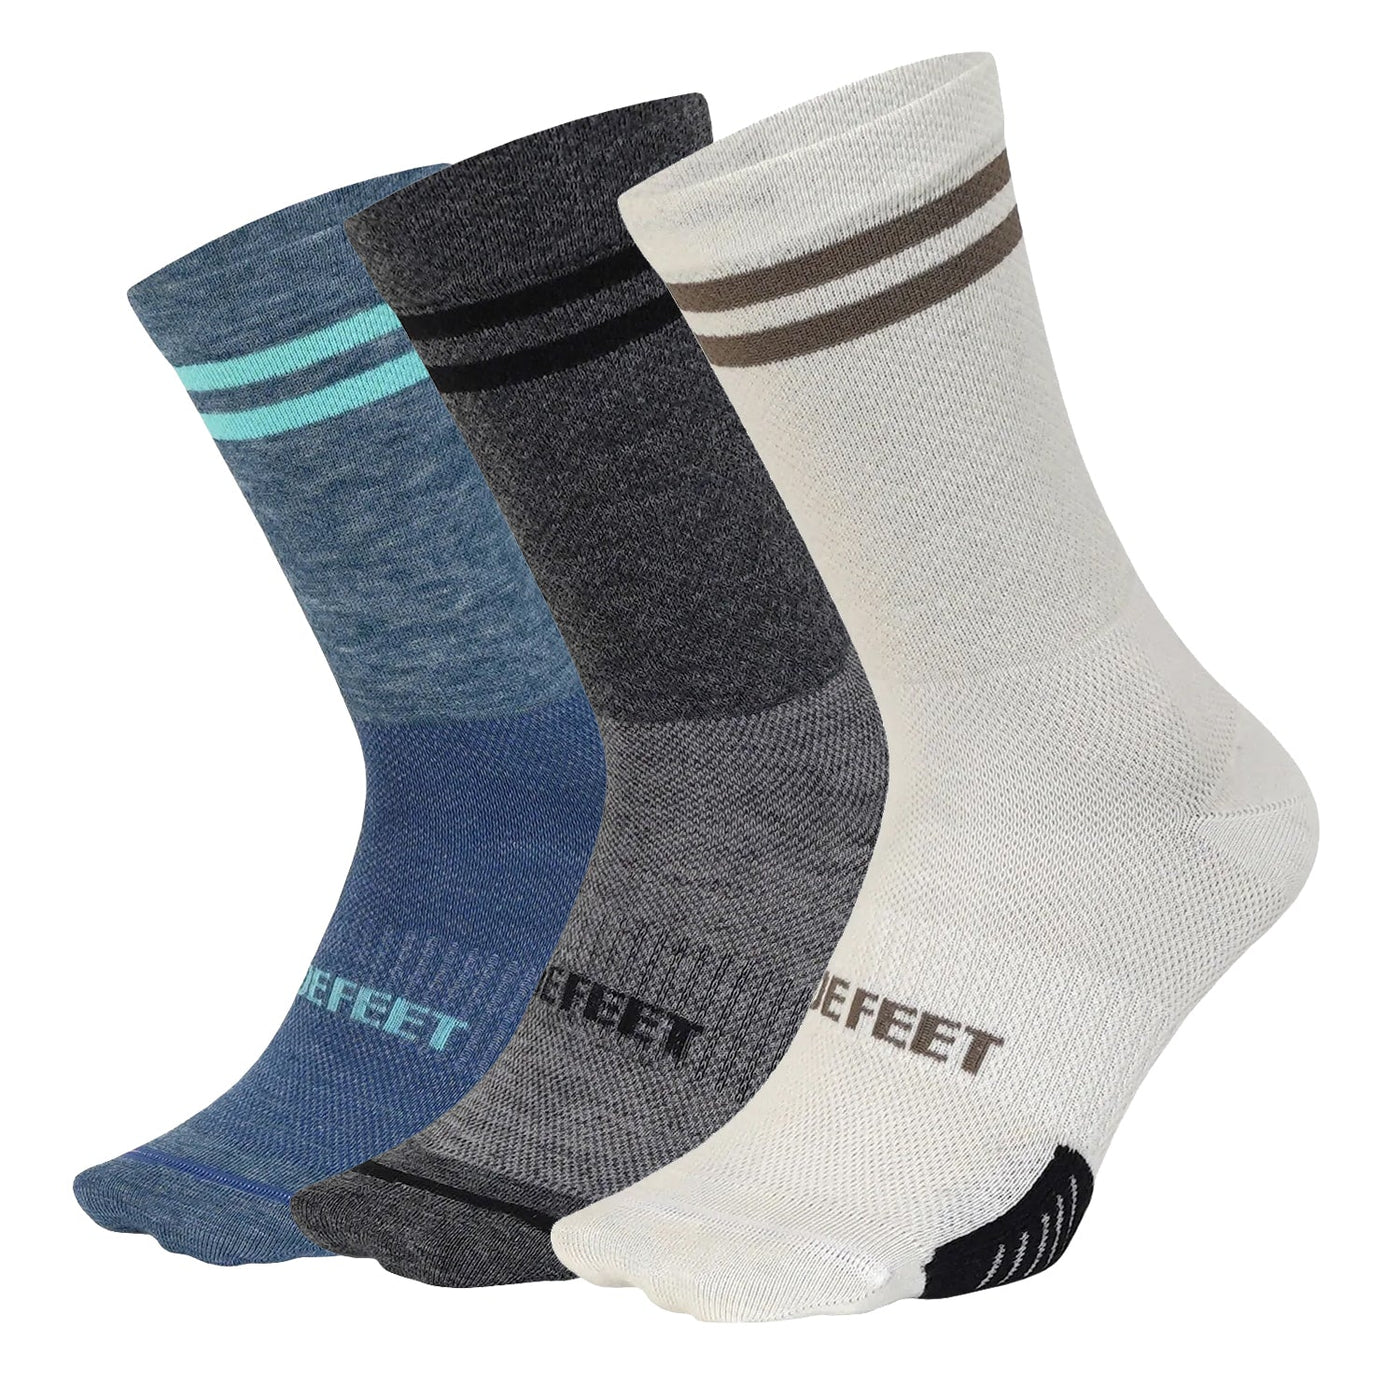 Cyclismo Wool Blend 6" - Double Stripe - DeFeet